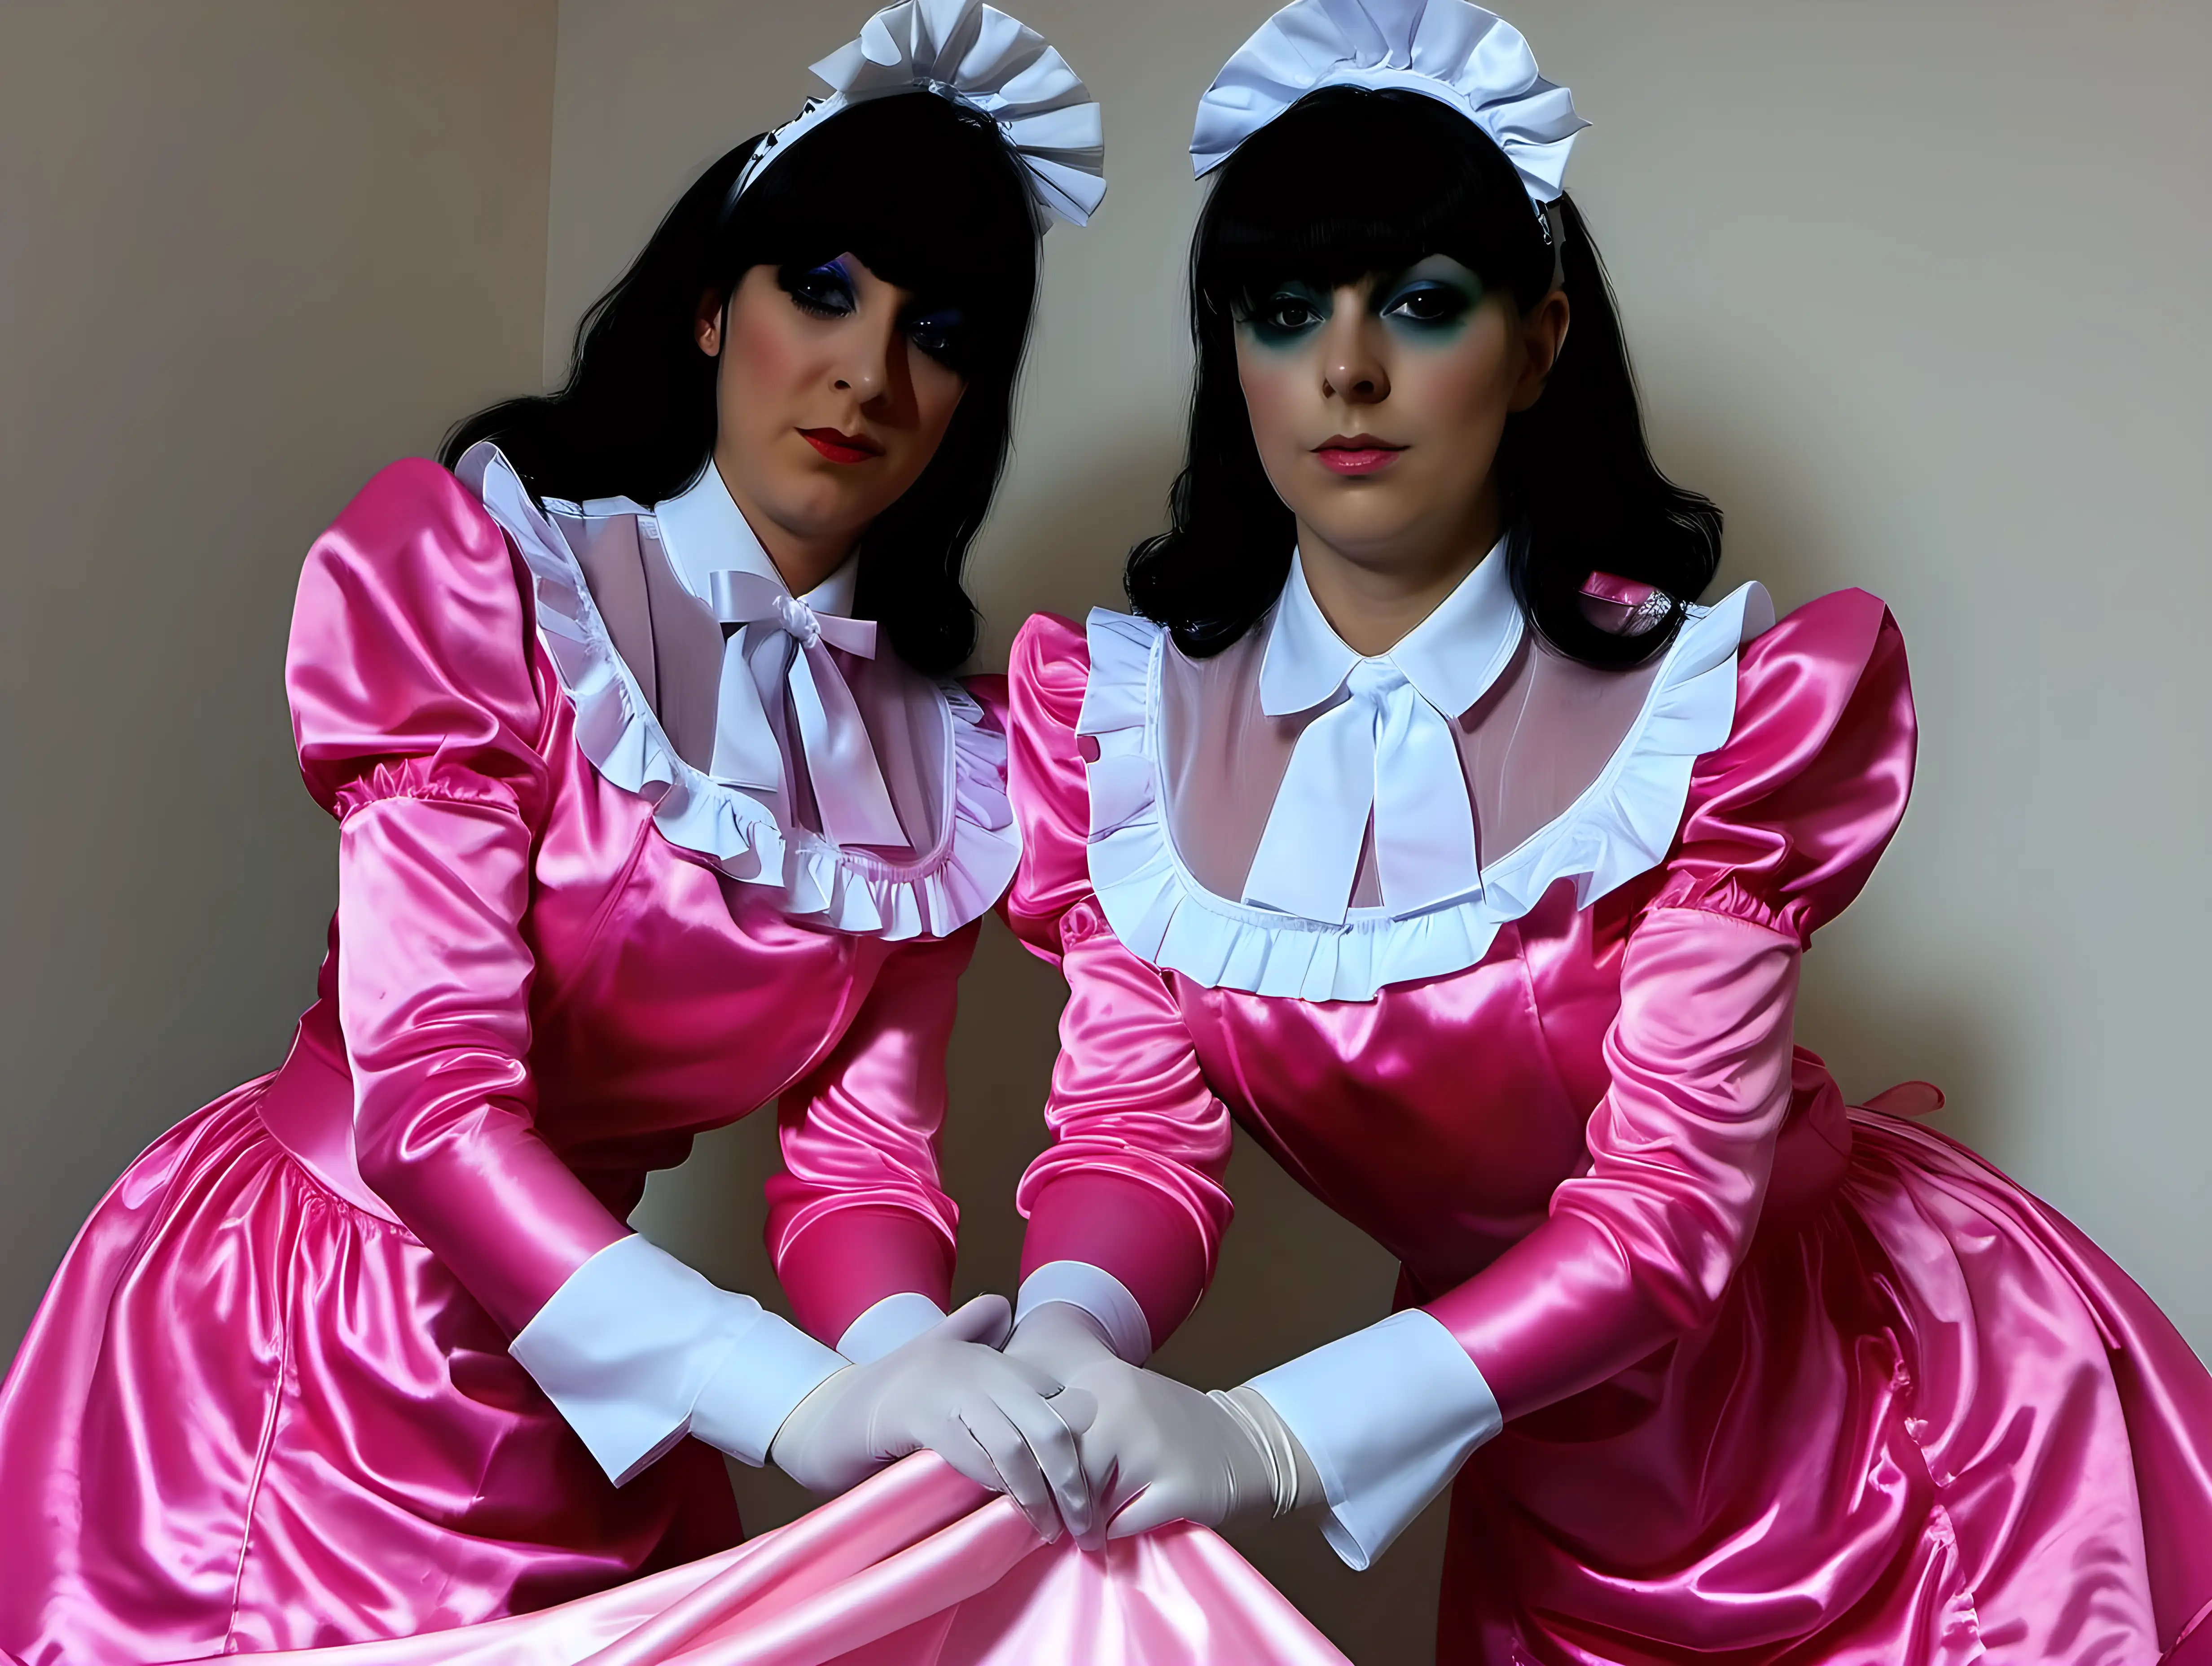 Elegant Sissy Maids in Satin Uniforms Engaged in Cleaning